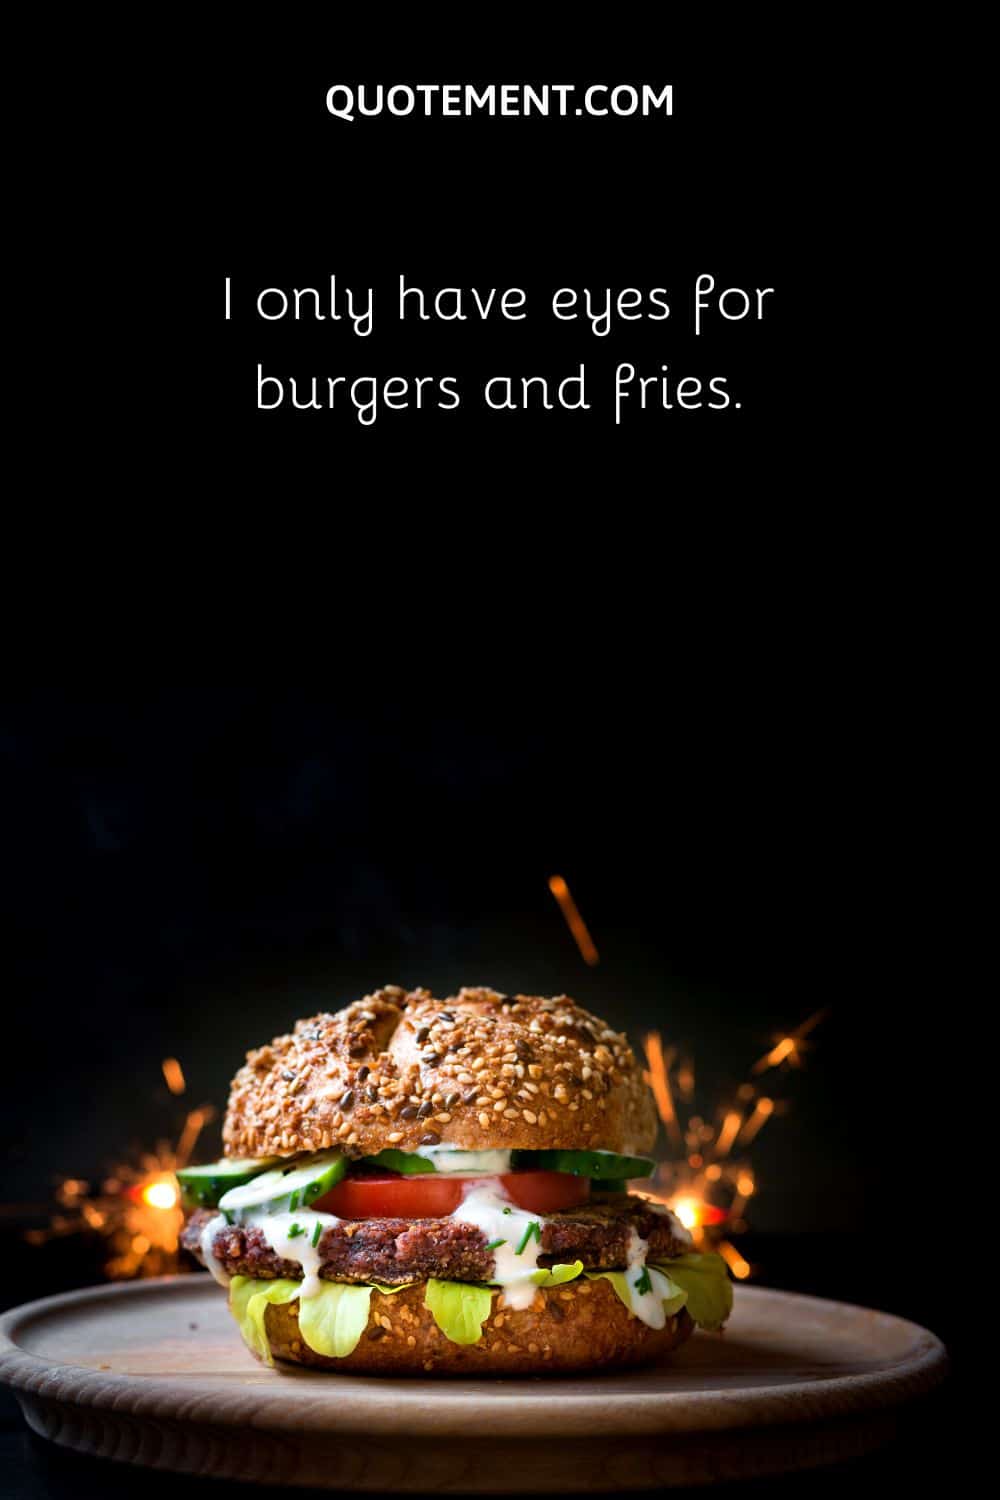 I only have eyes for burgers and fries.